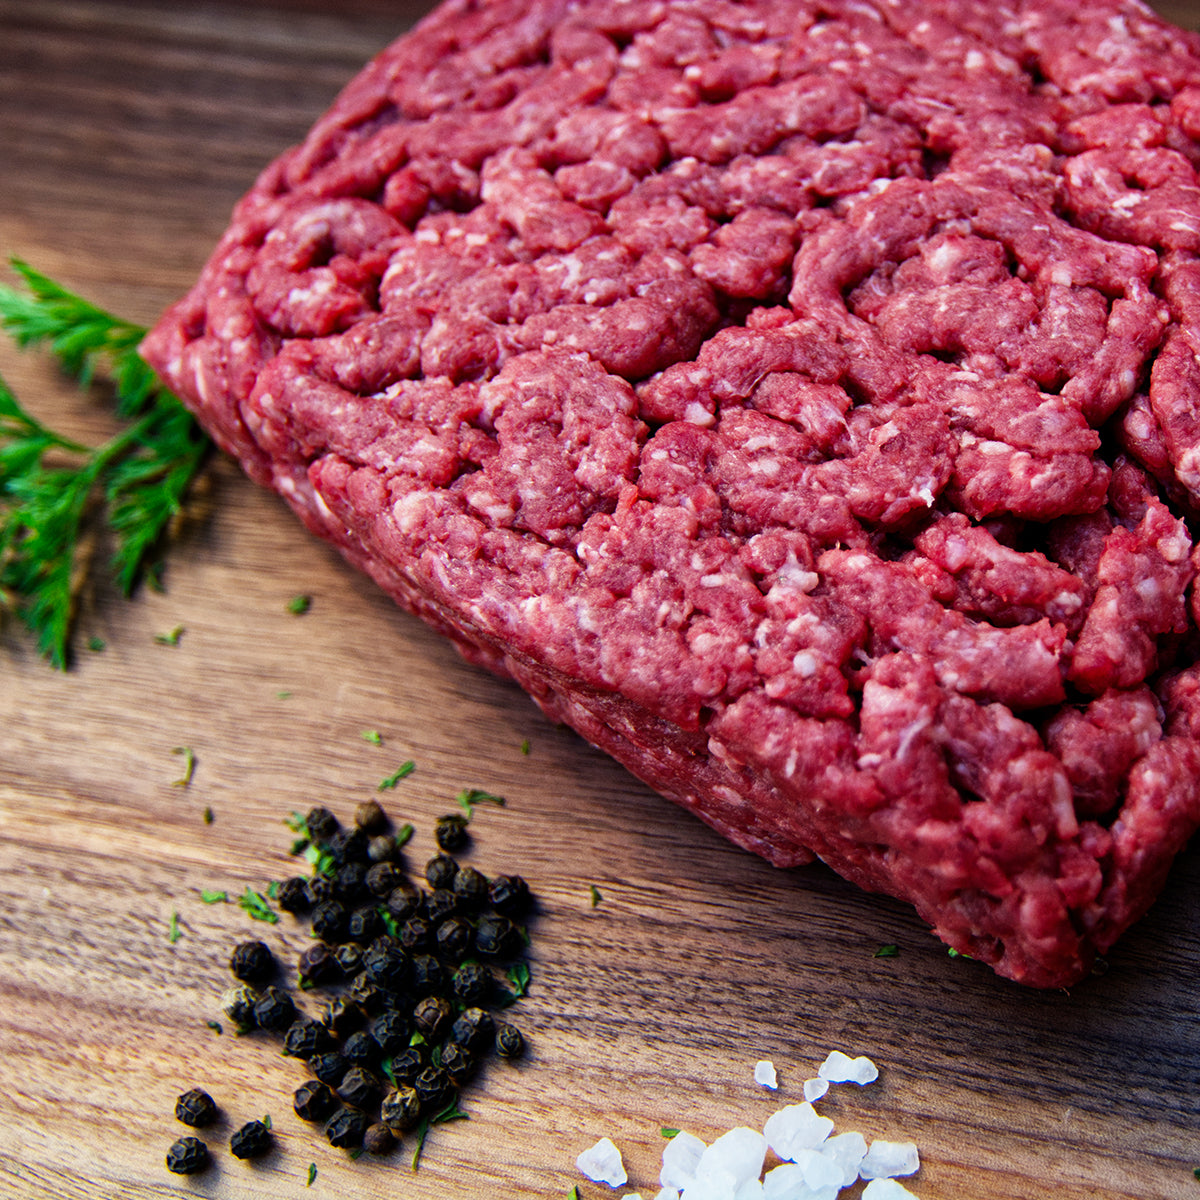 The Ground Beef Subscription Box